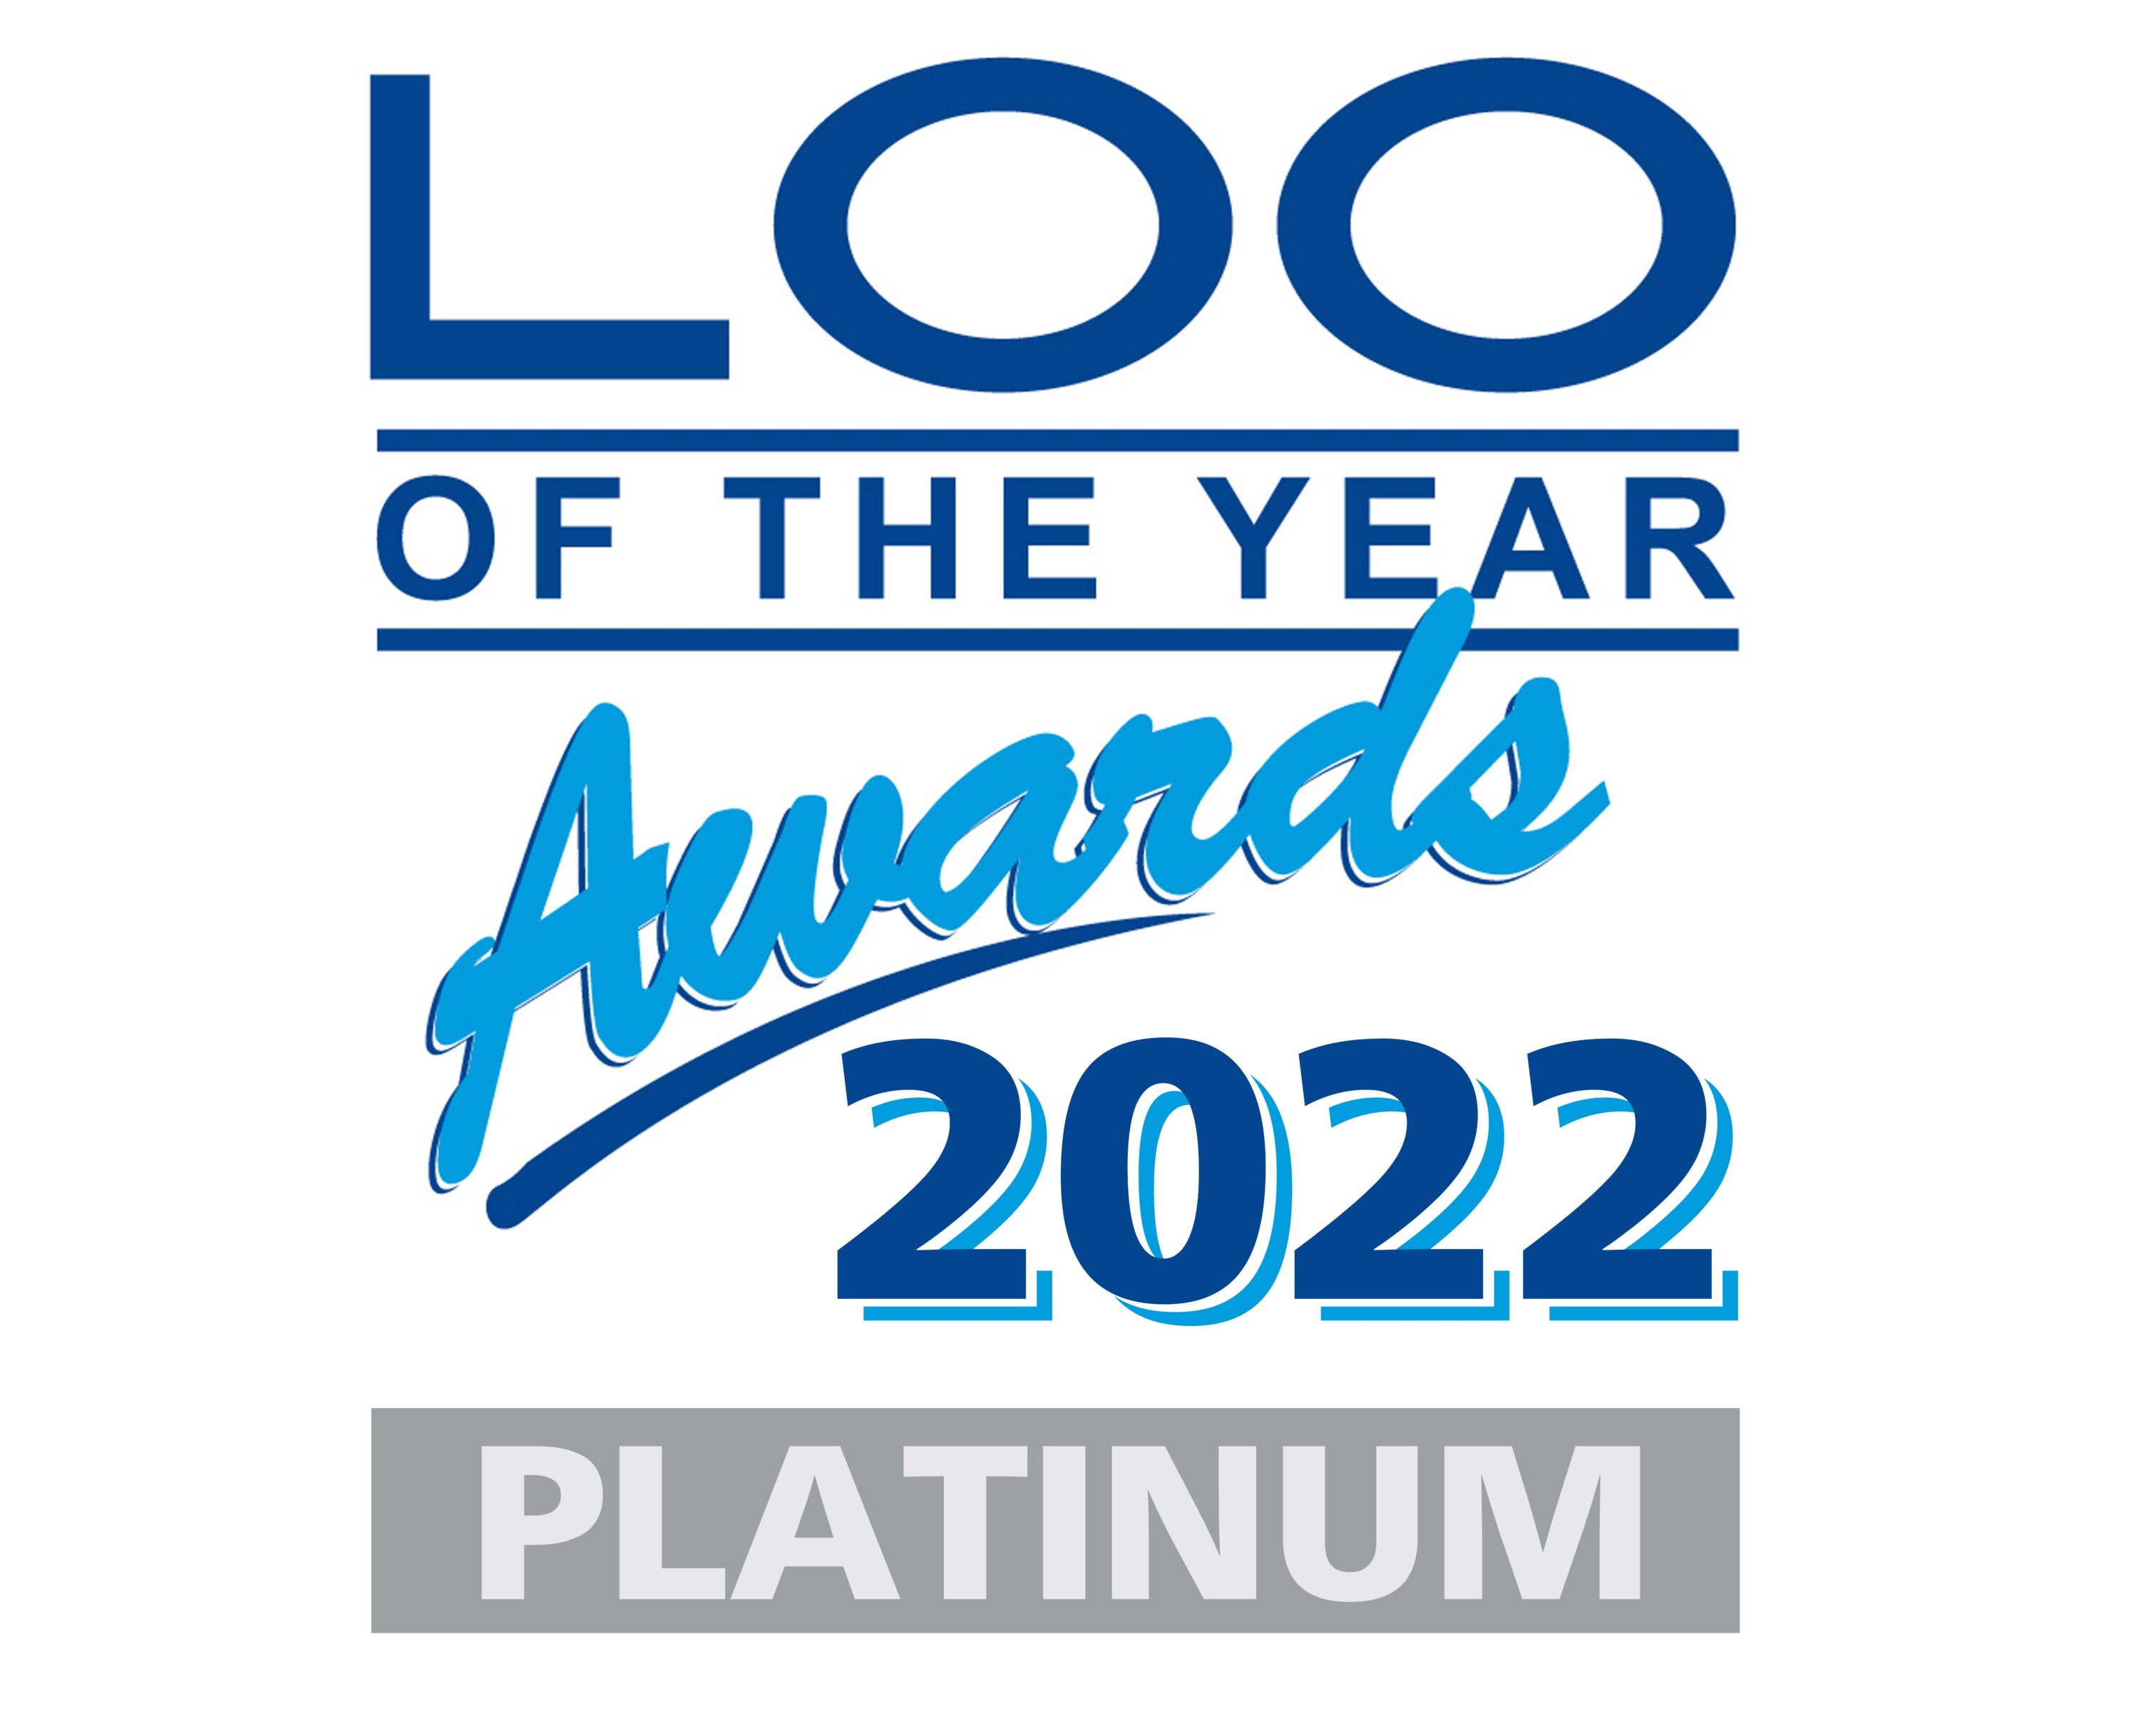 Loo of the Year 2022 Platinum 